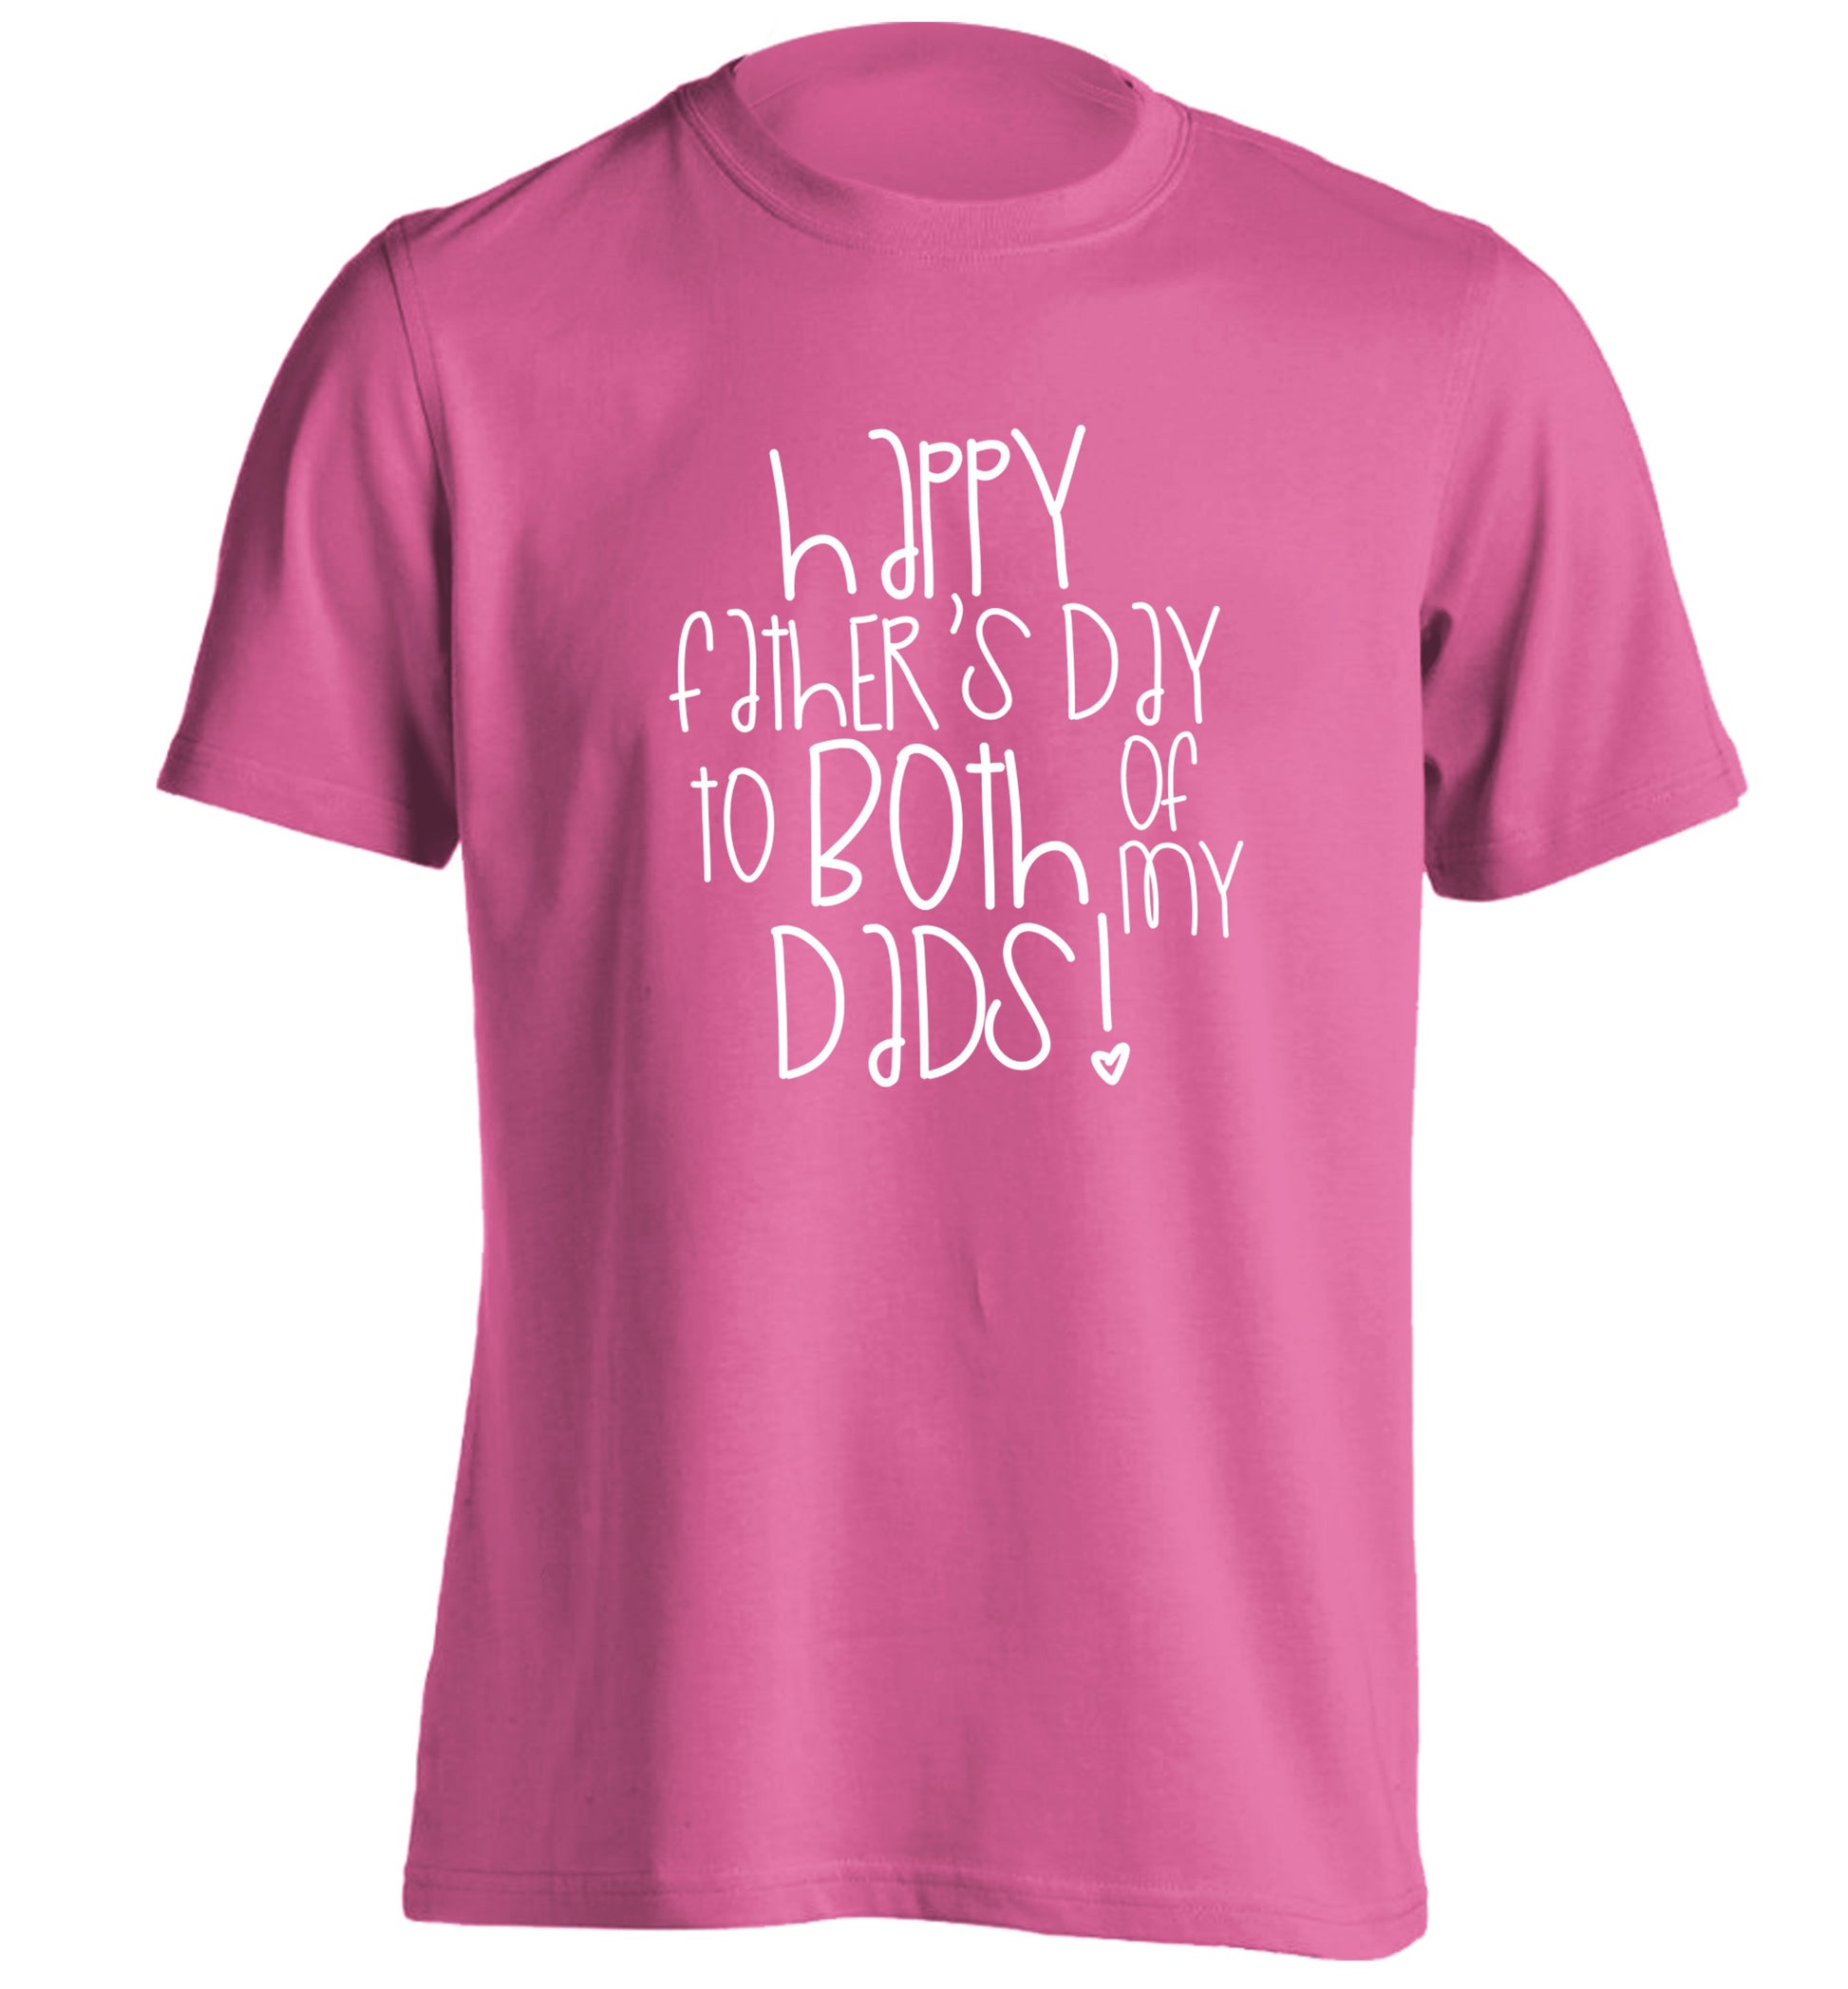 Happy father's day to both of my dads adults unisex pink Tshirt 2XL